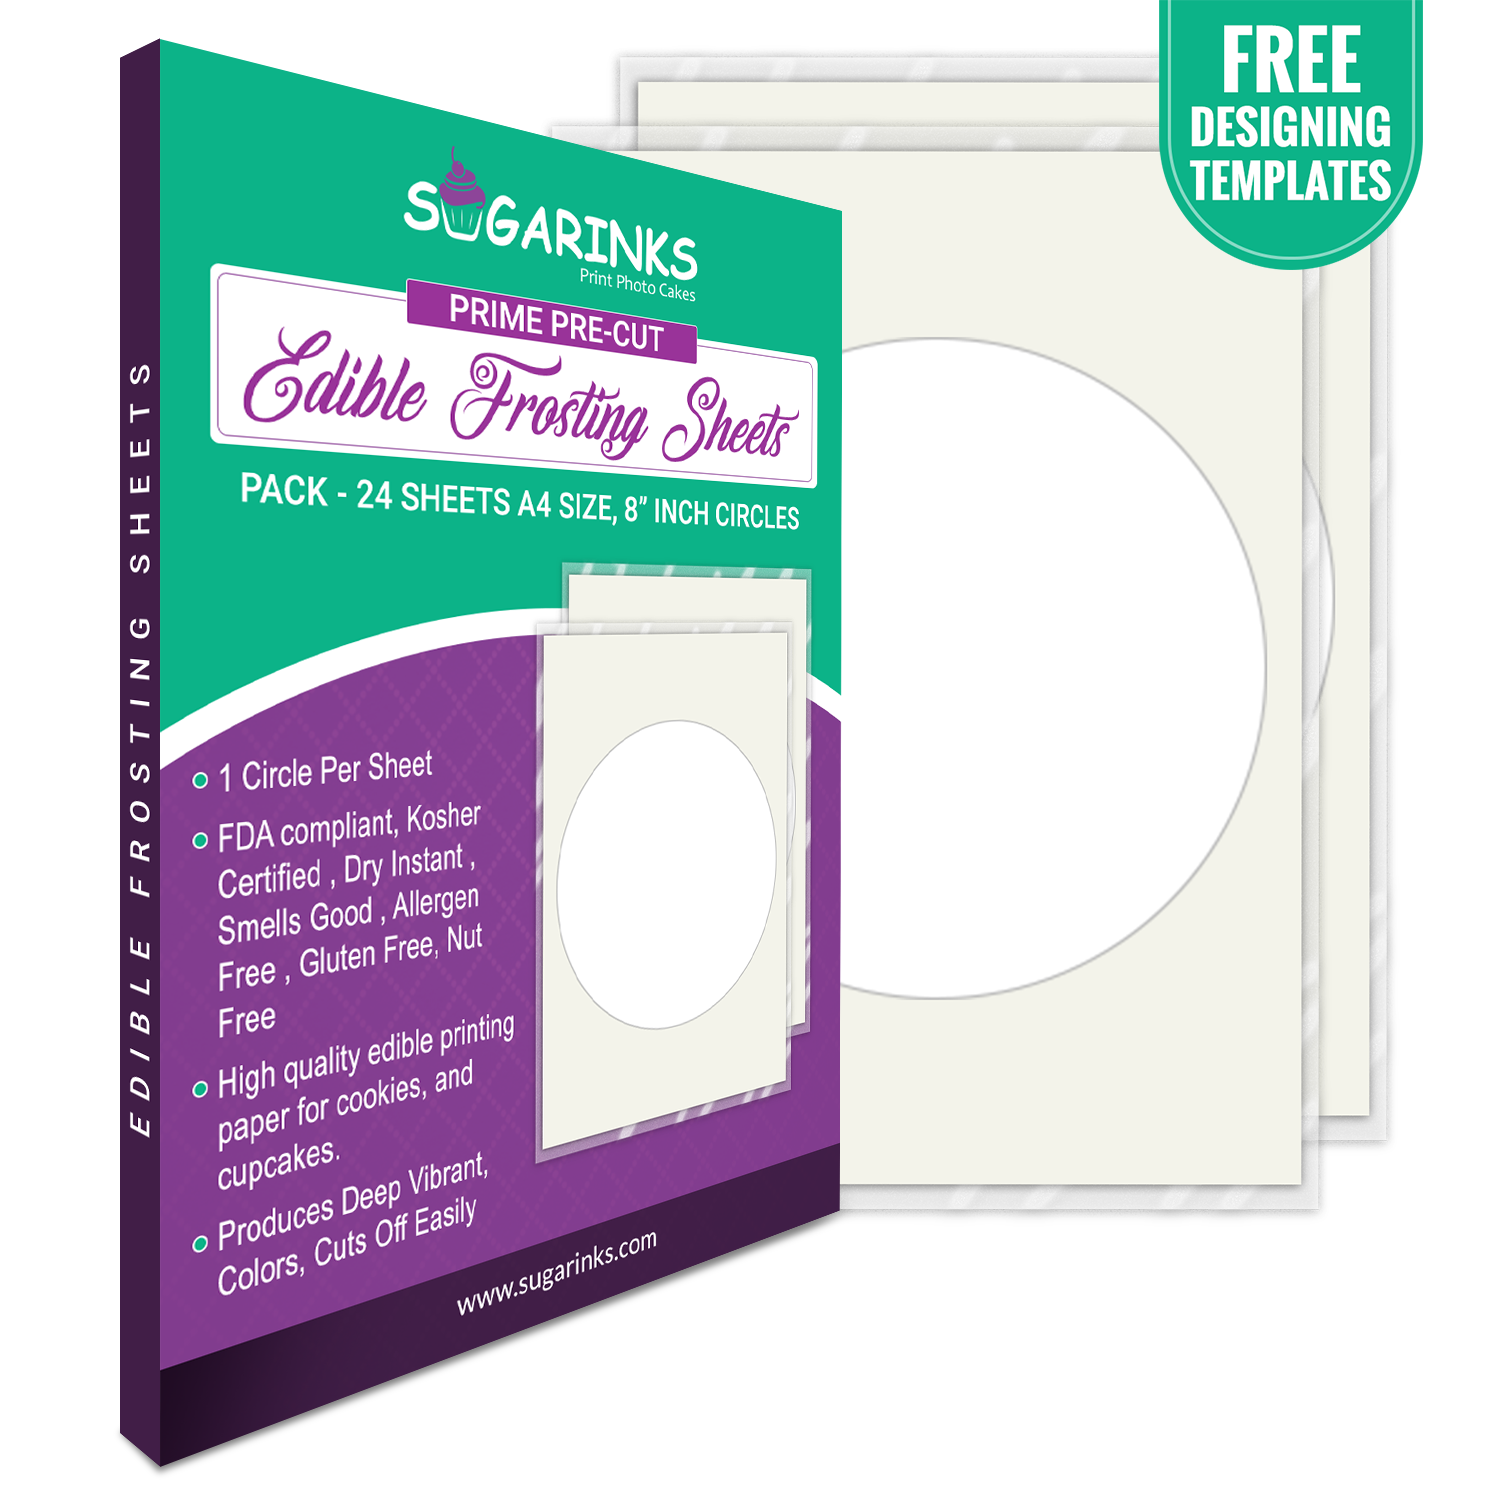 Sugarinks Premium Quality Pre-Cut Circles Frosting Sheets (8 inches, 1 Circles) - A4 Size, Pack of 24